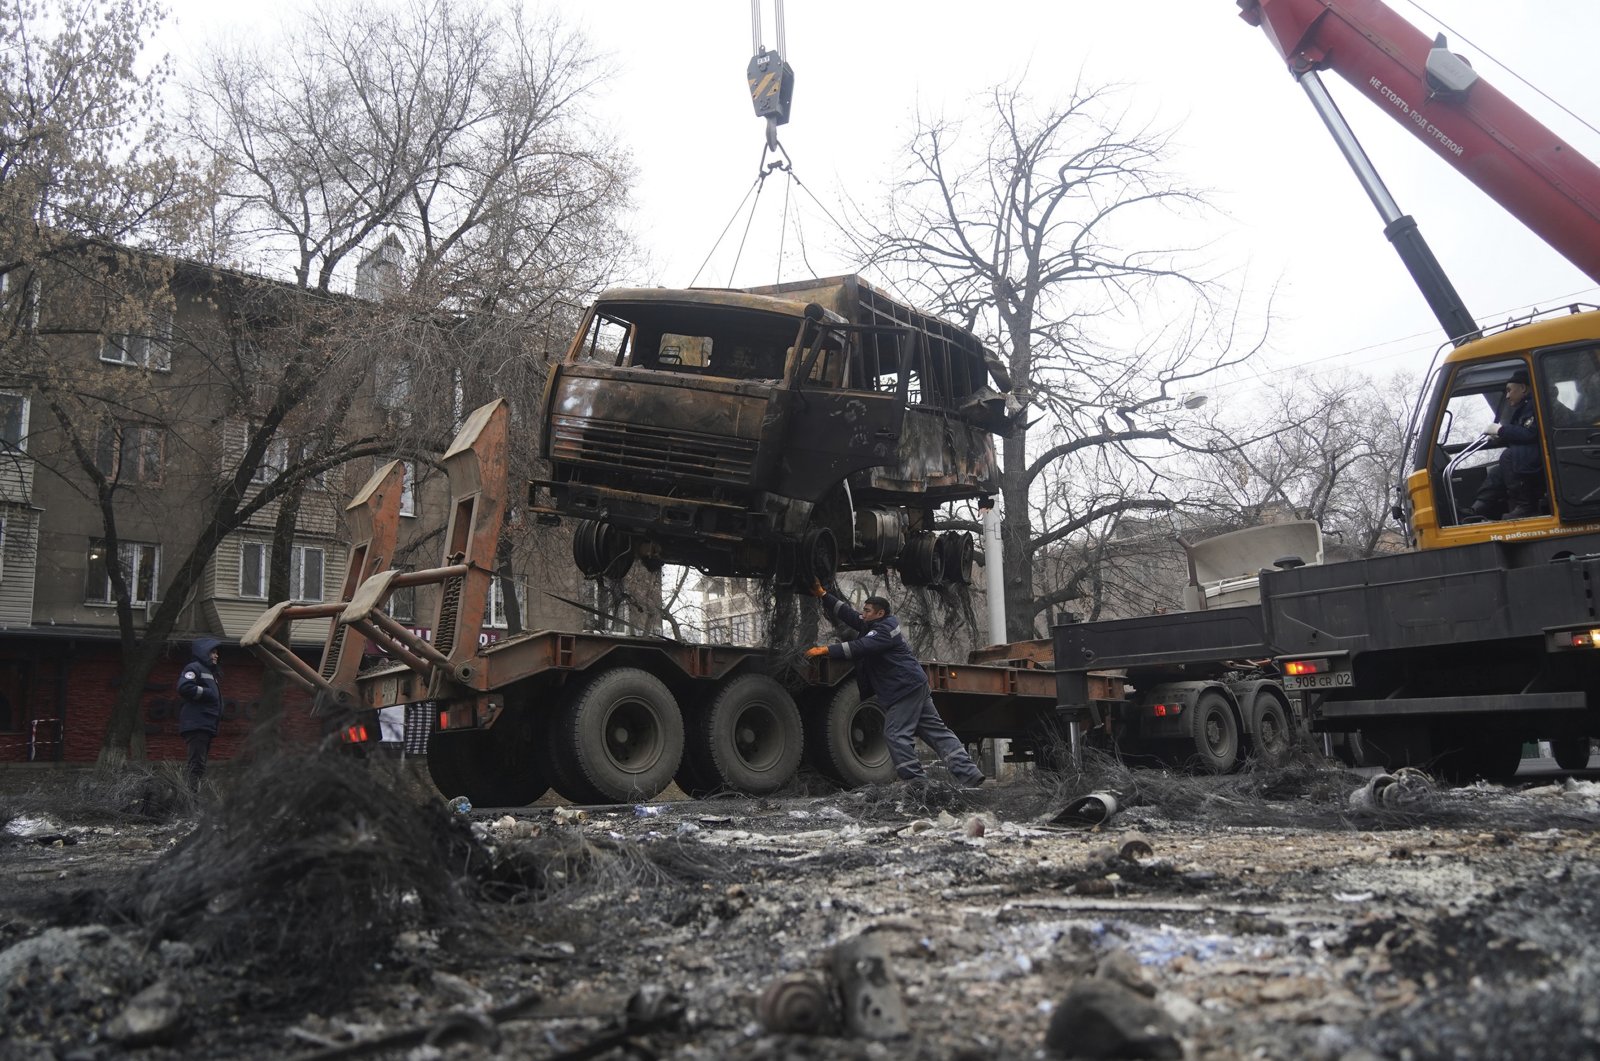 A crane loads a military truck burned during clashes onto the platform in Almaty, Kazakhstan, Jan. 9, 2022. (AP Photo)